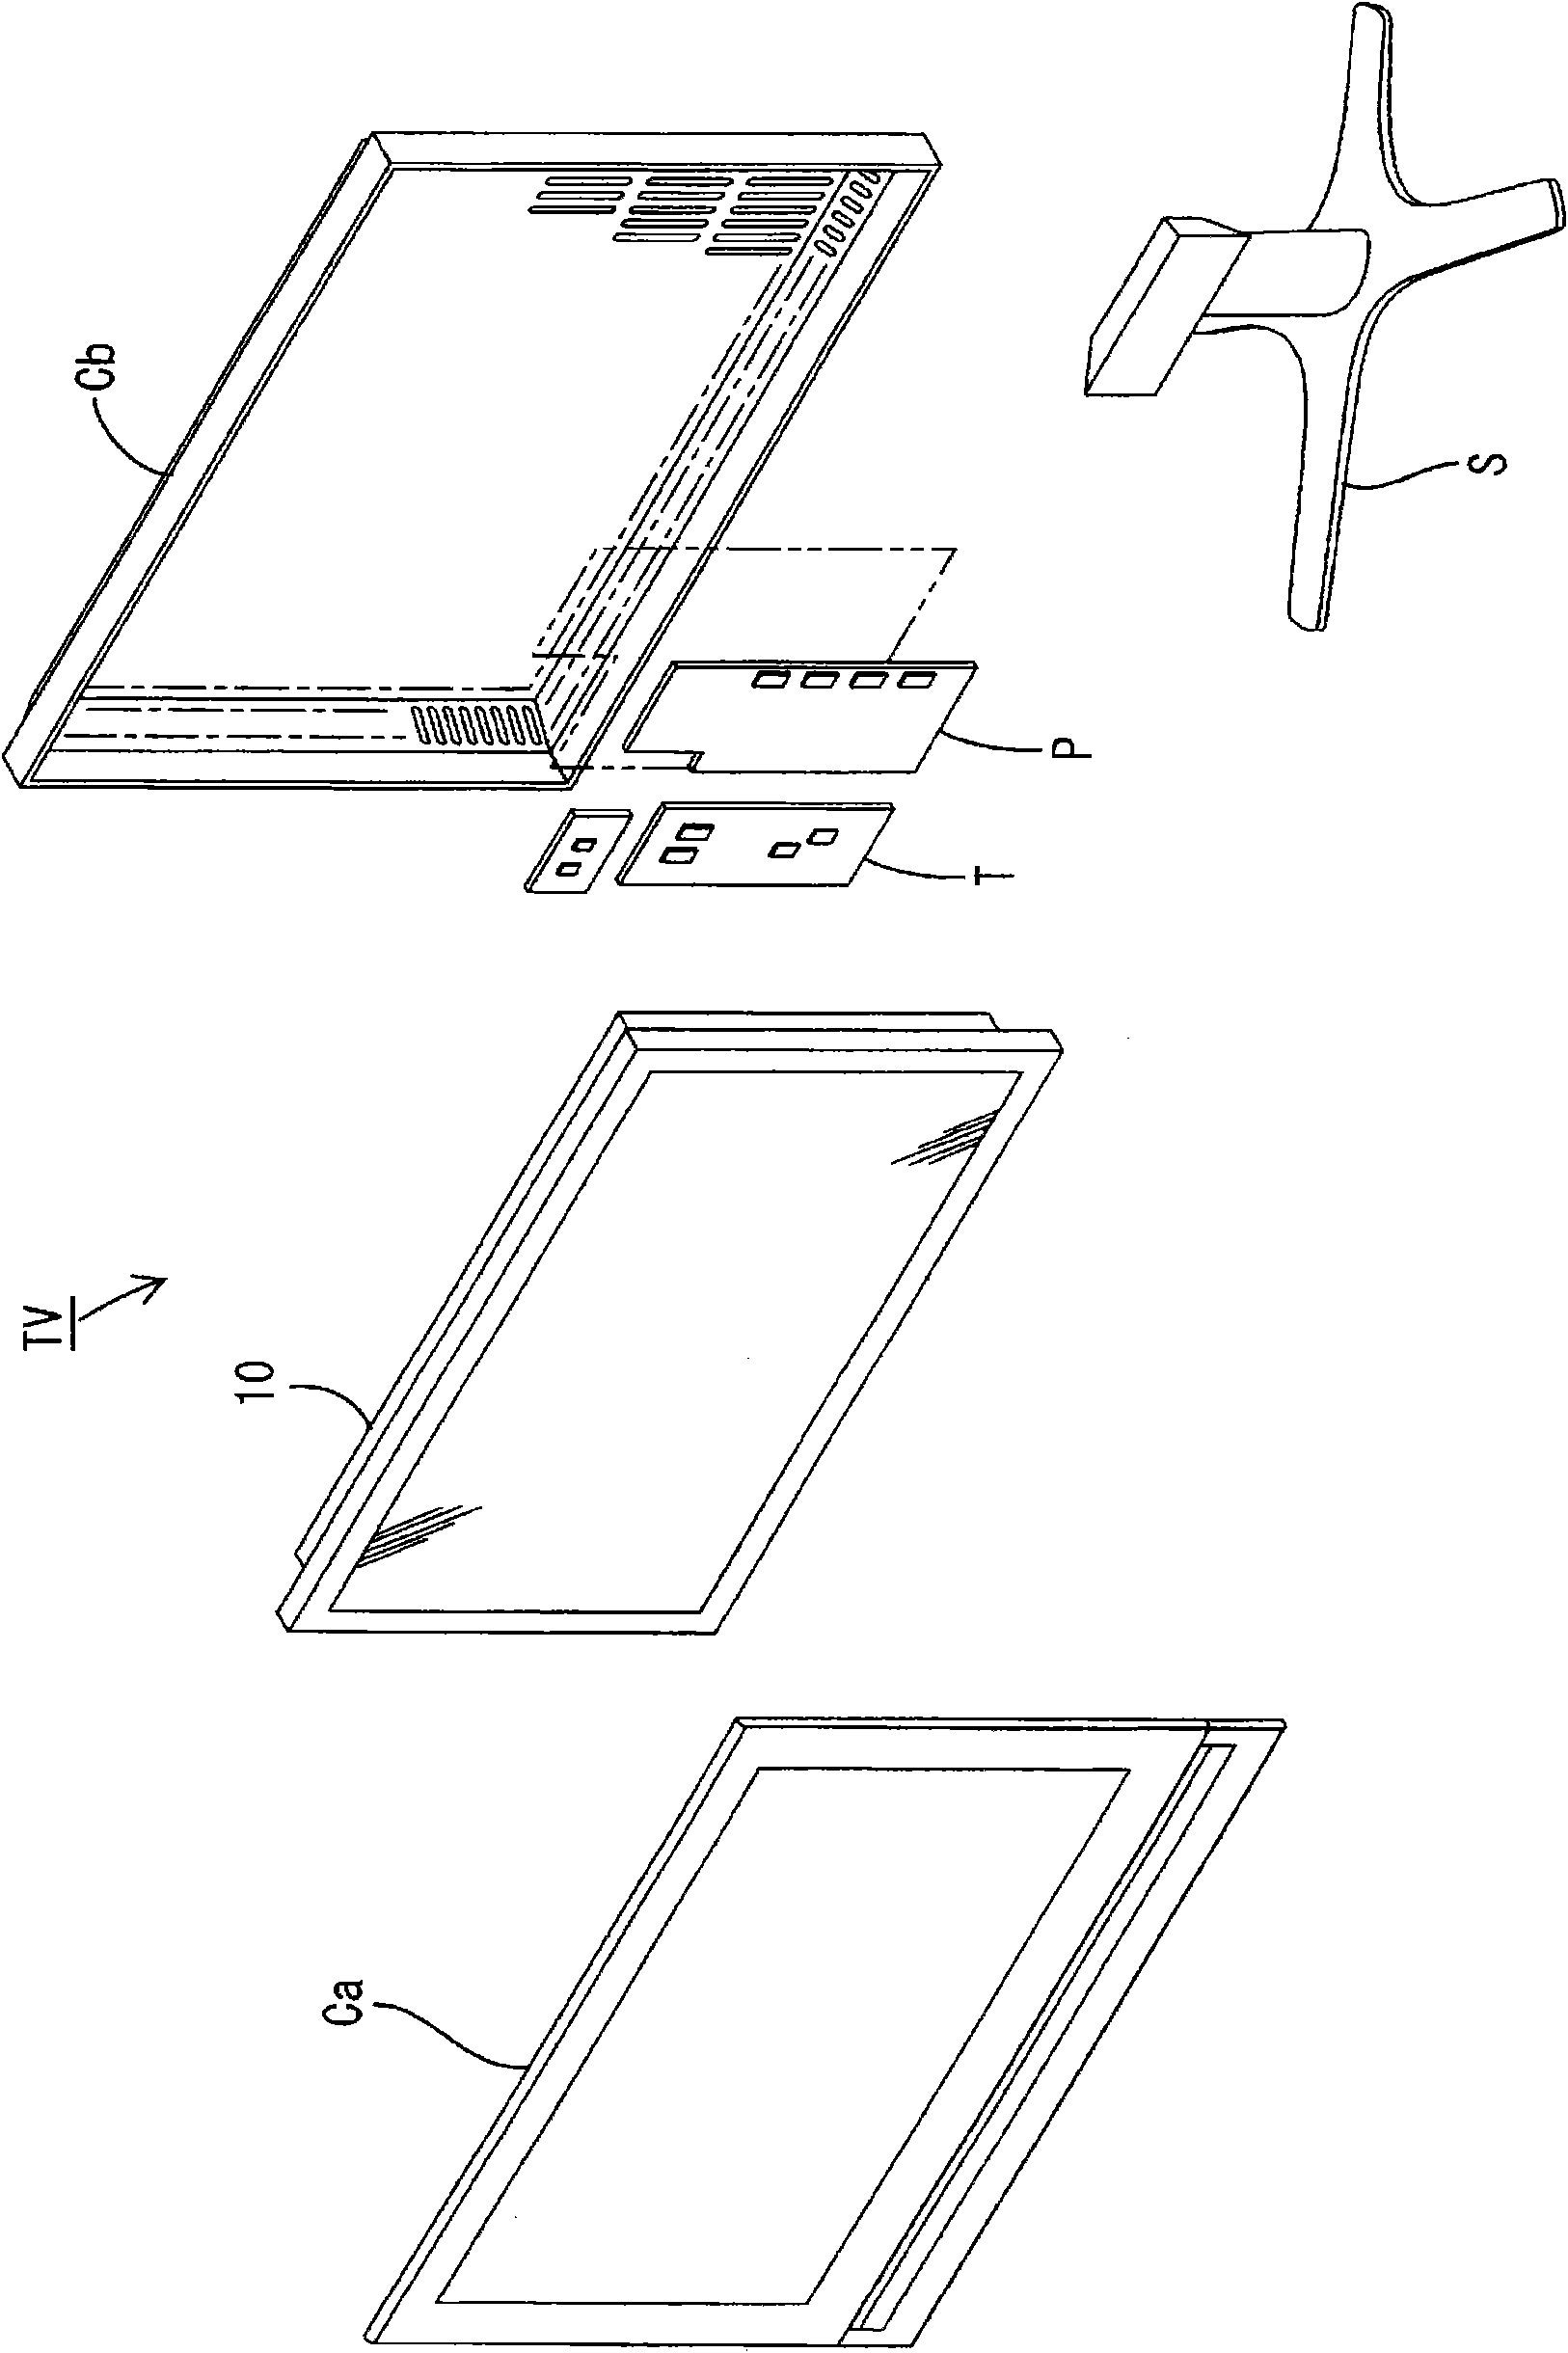 Illumination device, display device, and television receiving device